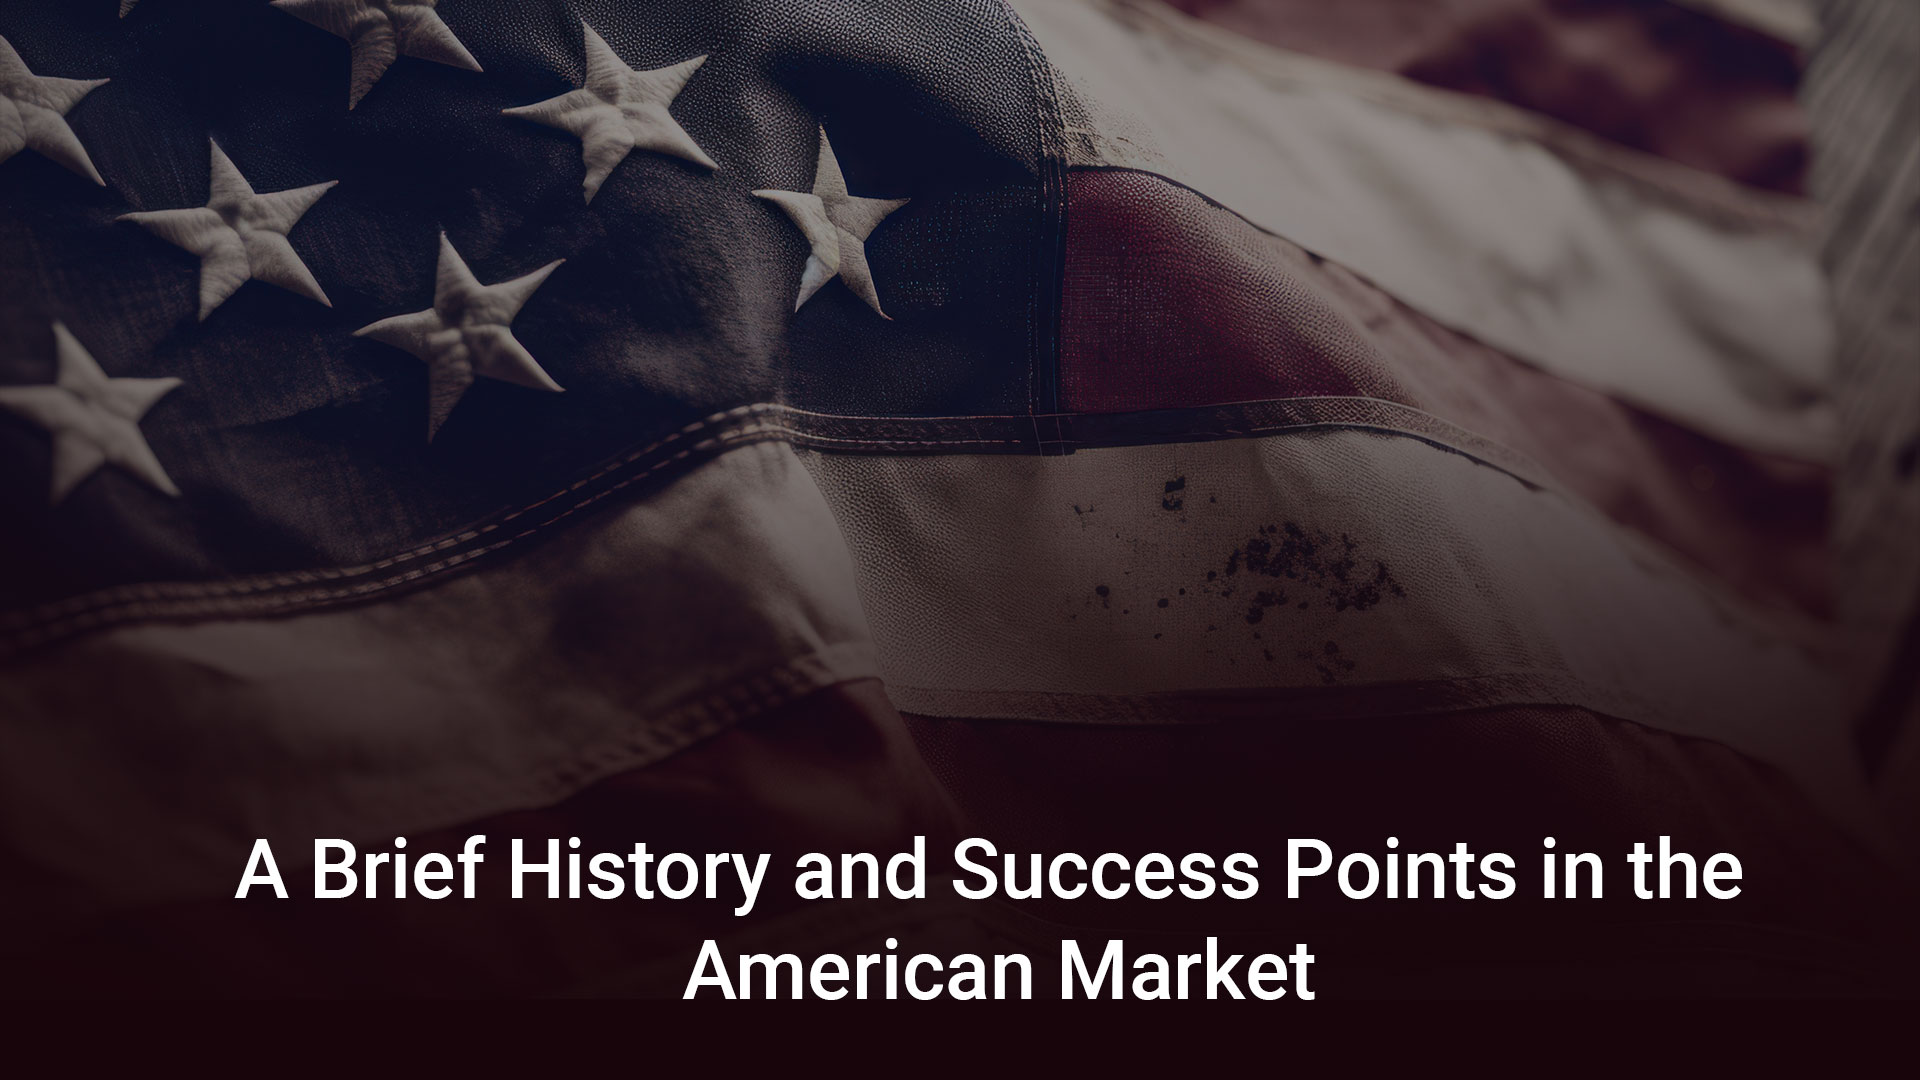 A Brief History and Success Points in the American Market